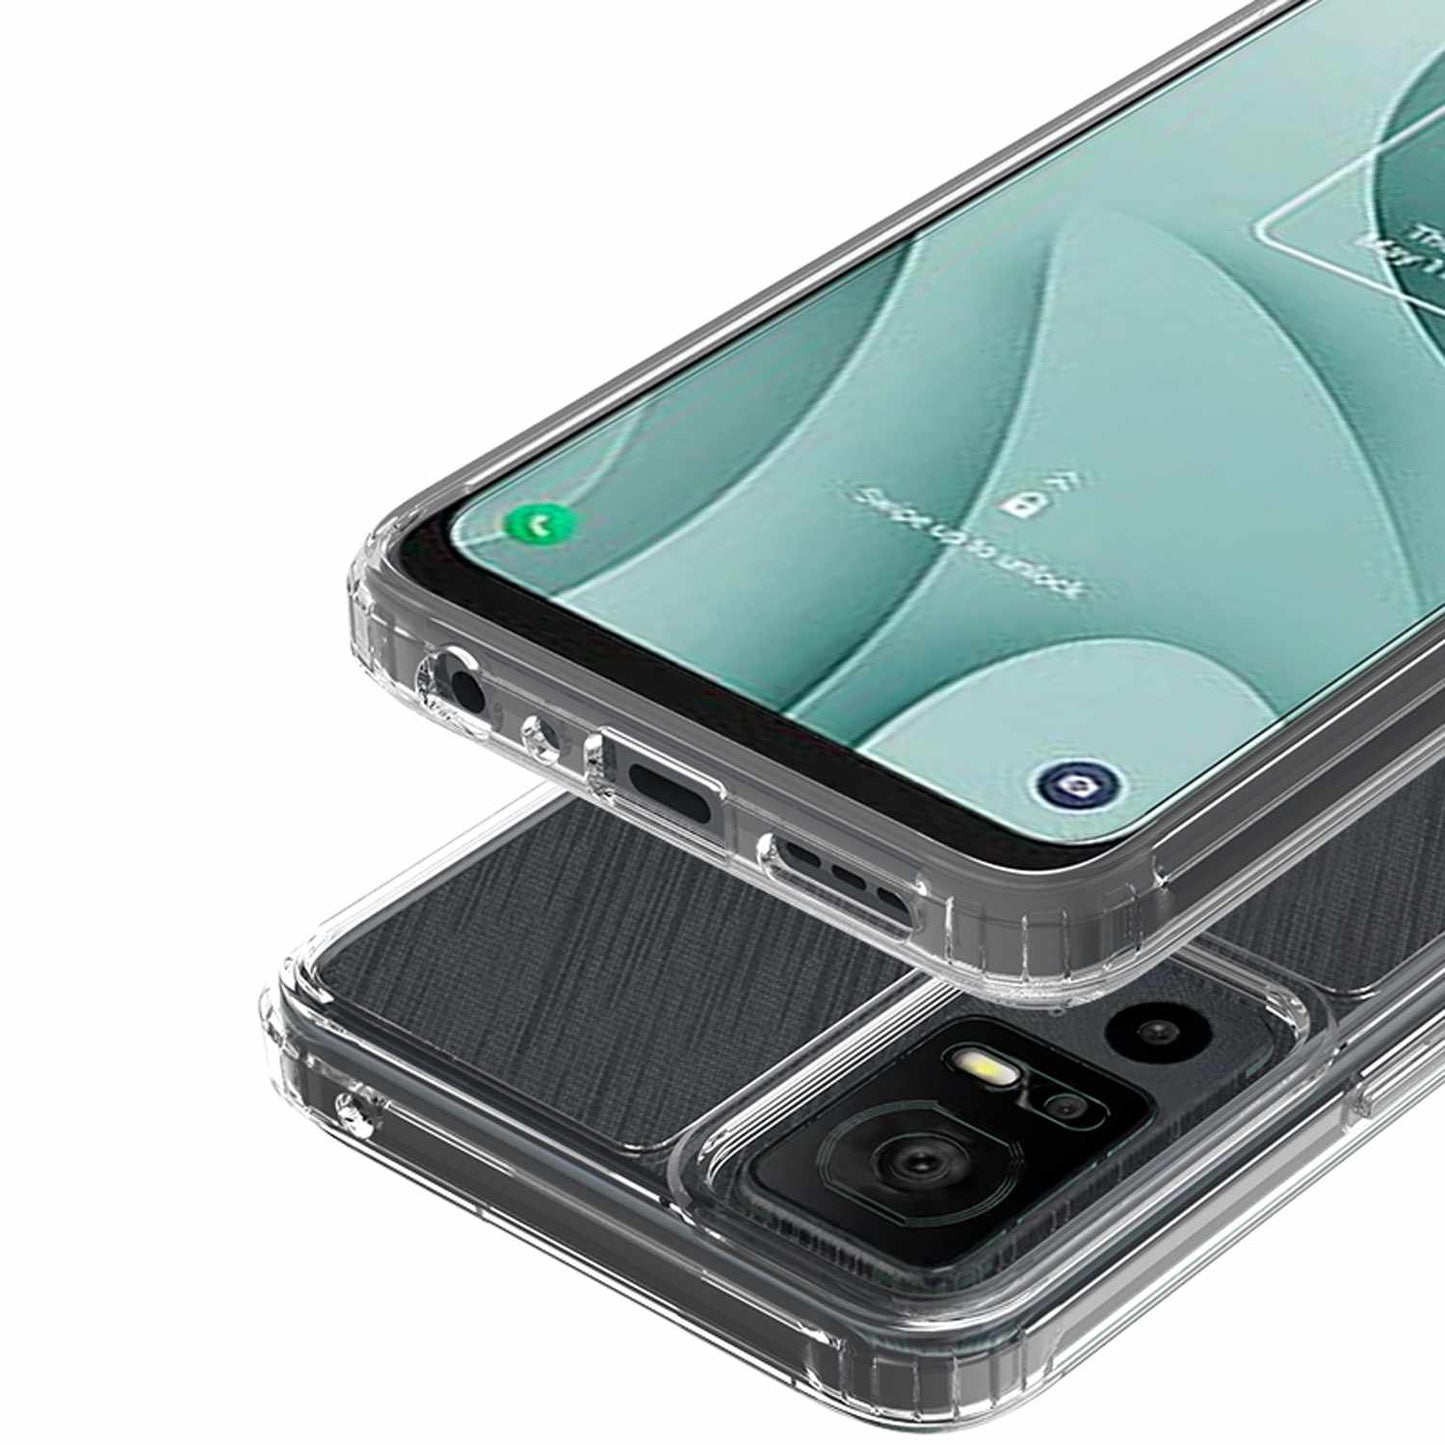 DropZone Rugged Case Clear for TCL 40 XE 5G